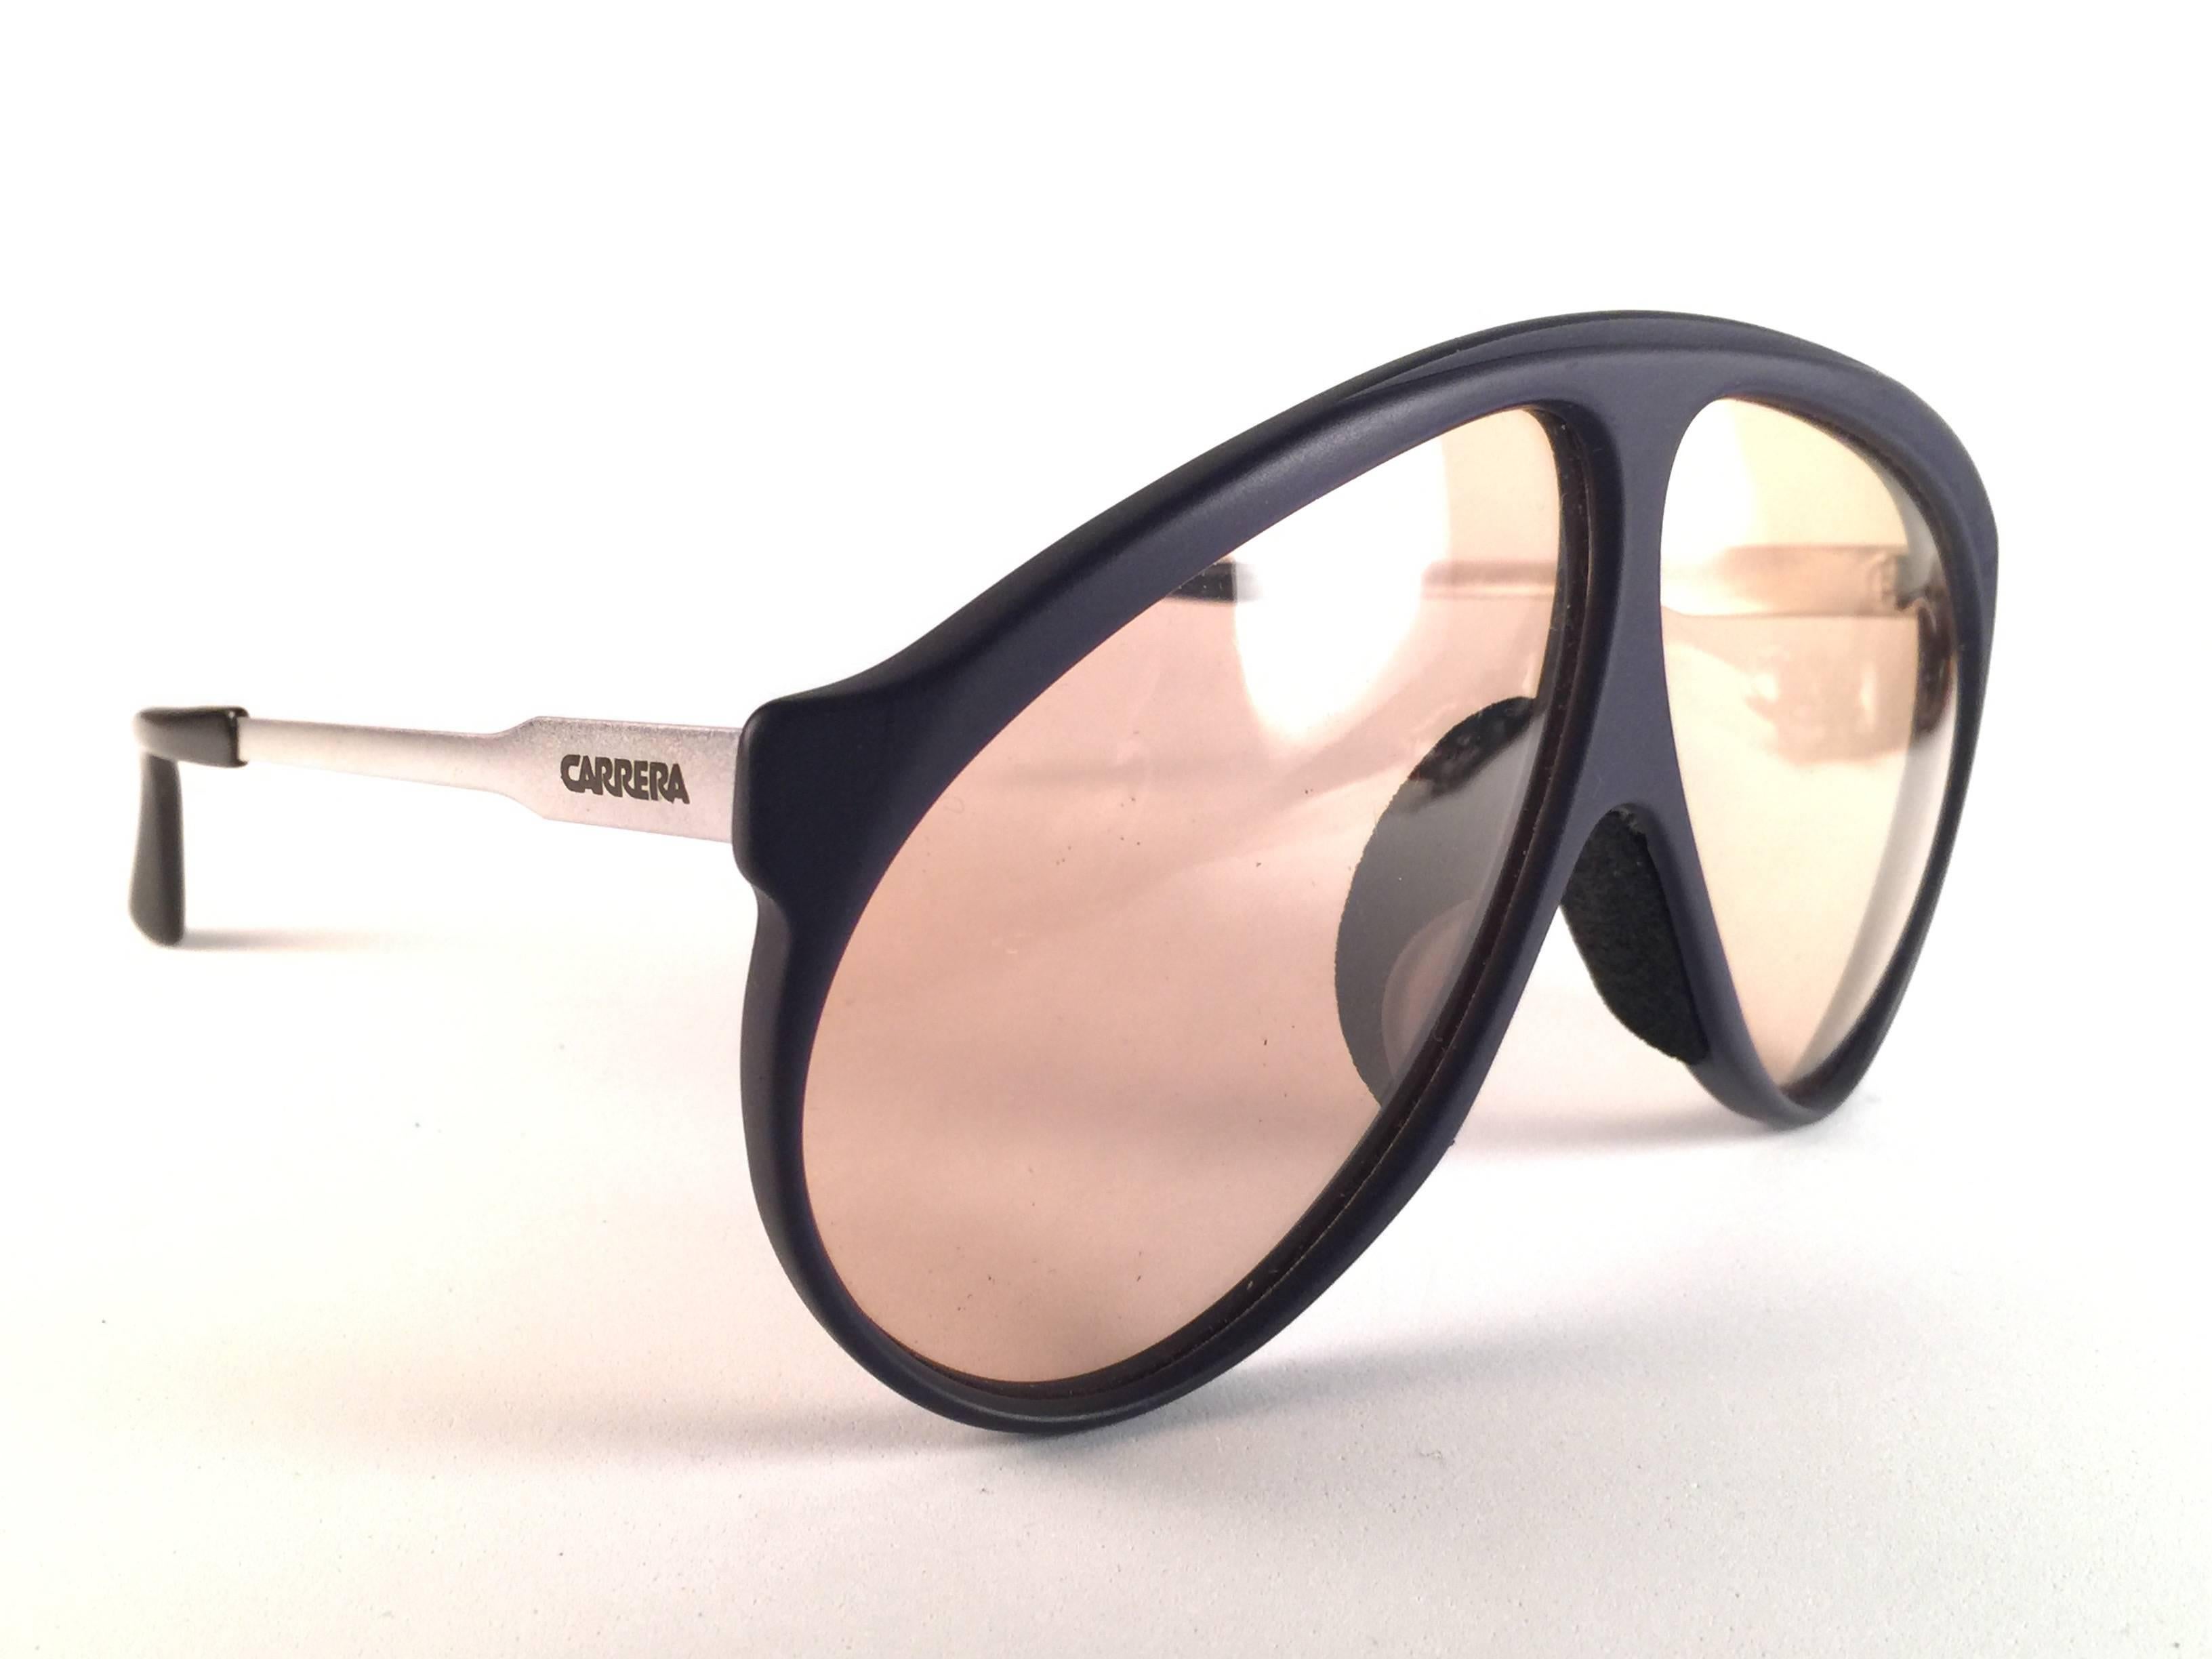 New 1980's Oversized Carrera sunglasses.

Amazing craftsmanship and quality.   

New, never worn. Made in Austria.